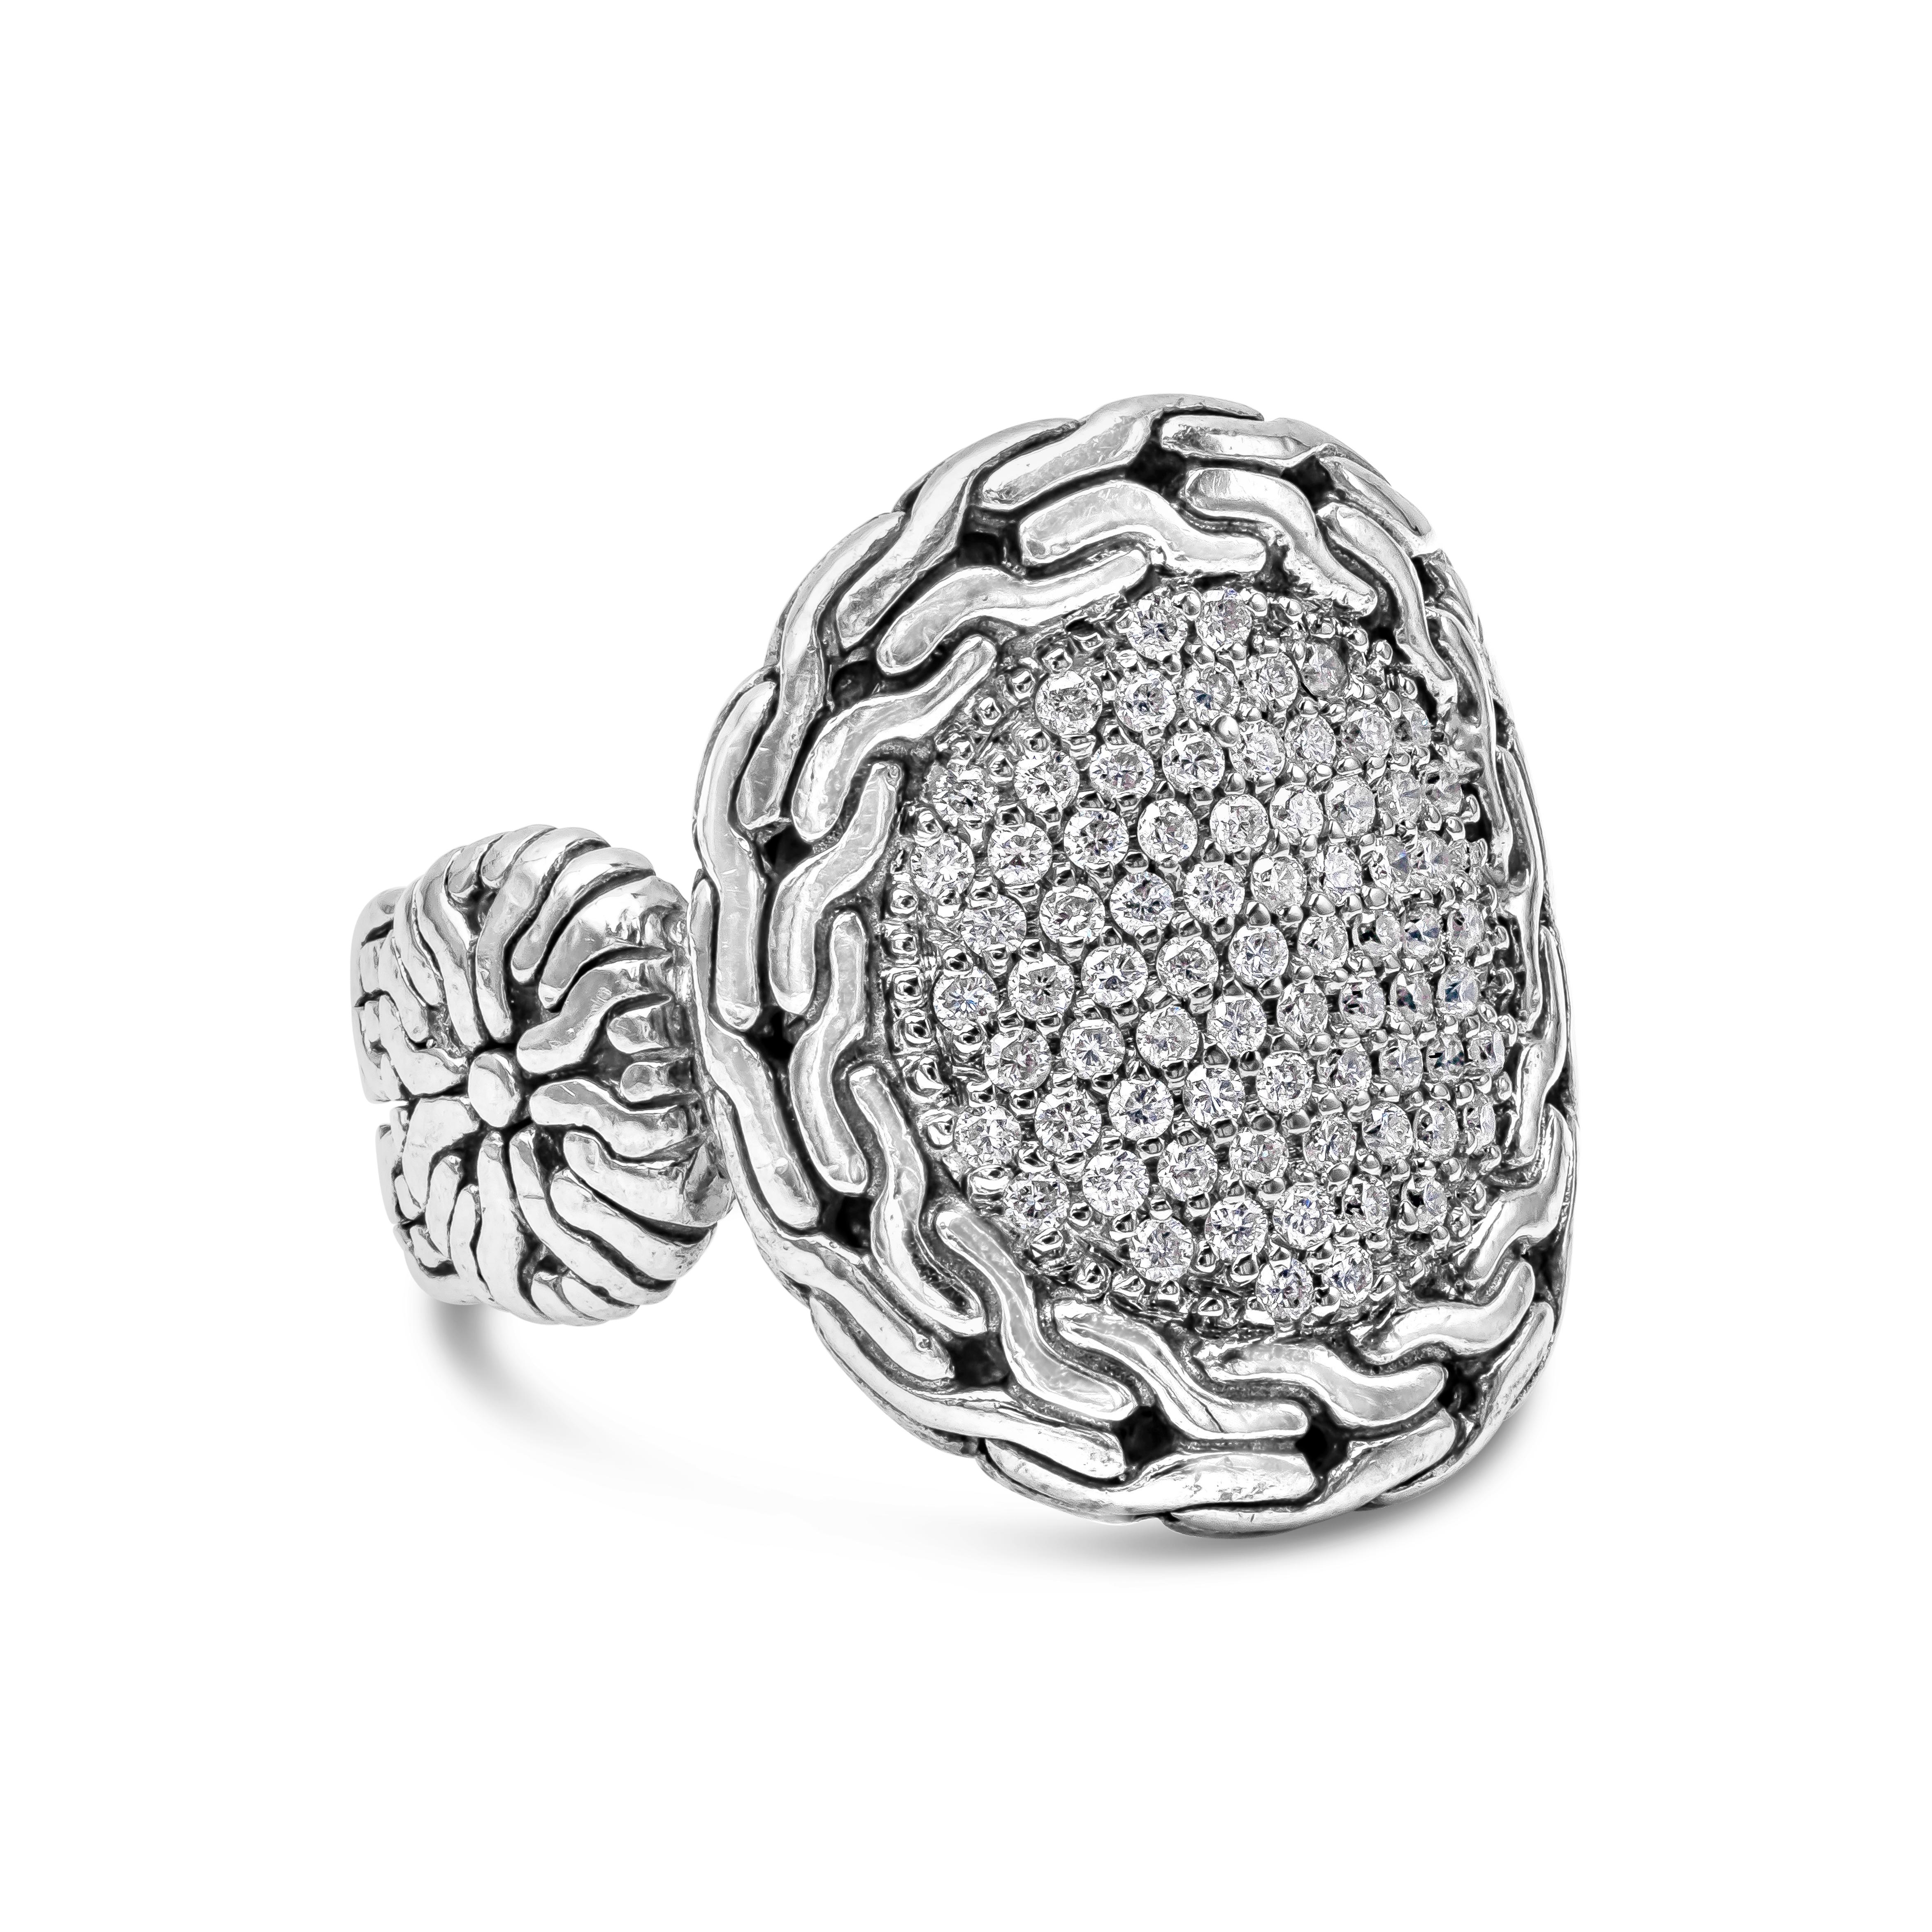 A fashionable ring showcasing a cluster of round brilliant diamonds, set in an intricately-designed mounting consisting of weaving lines. Diamonds weigh approximately 0.37 carats total and perfectly made in 18k white gold and silver. Size 6.5 US